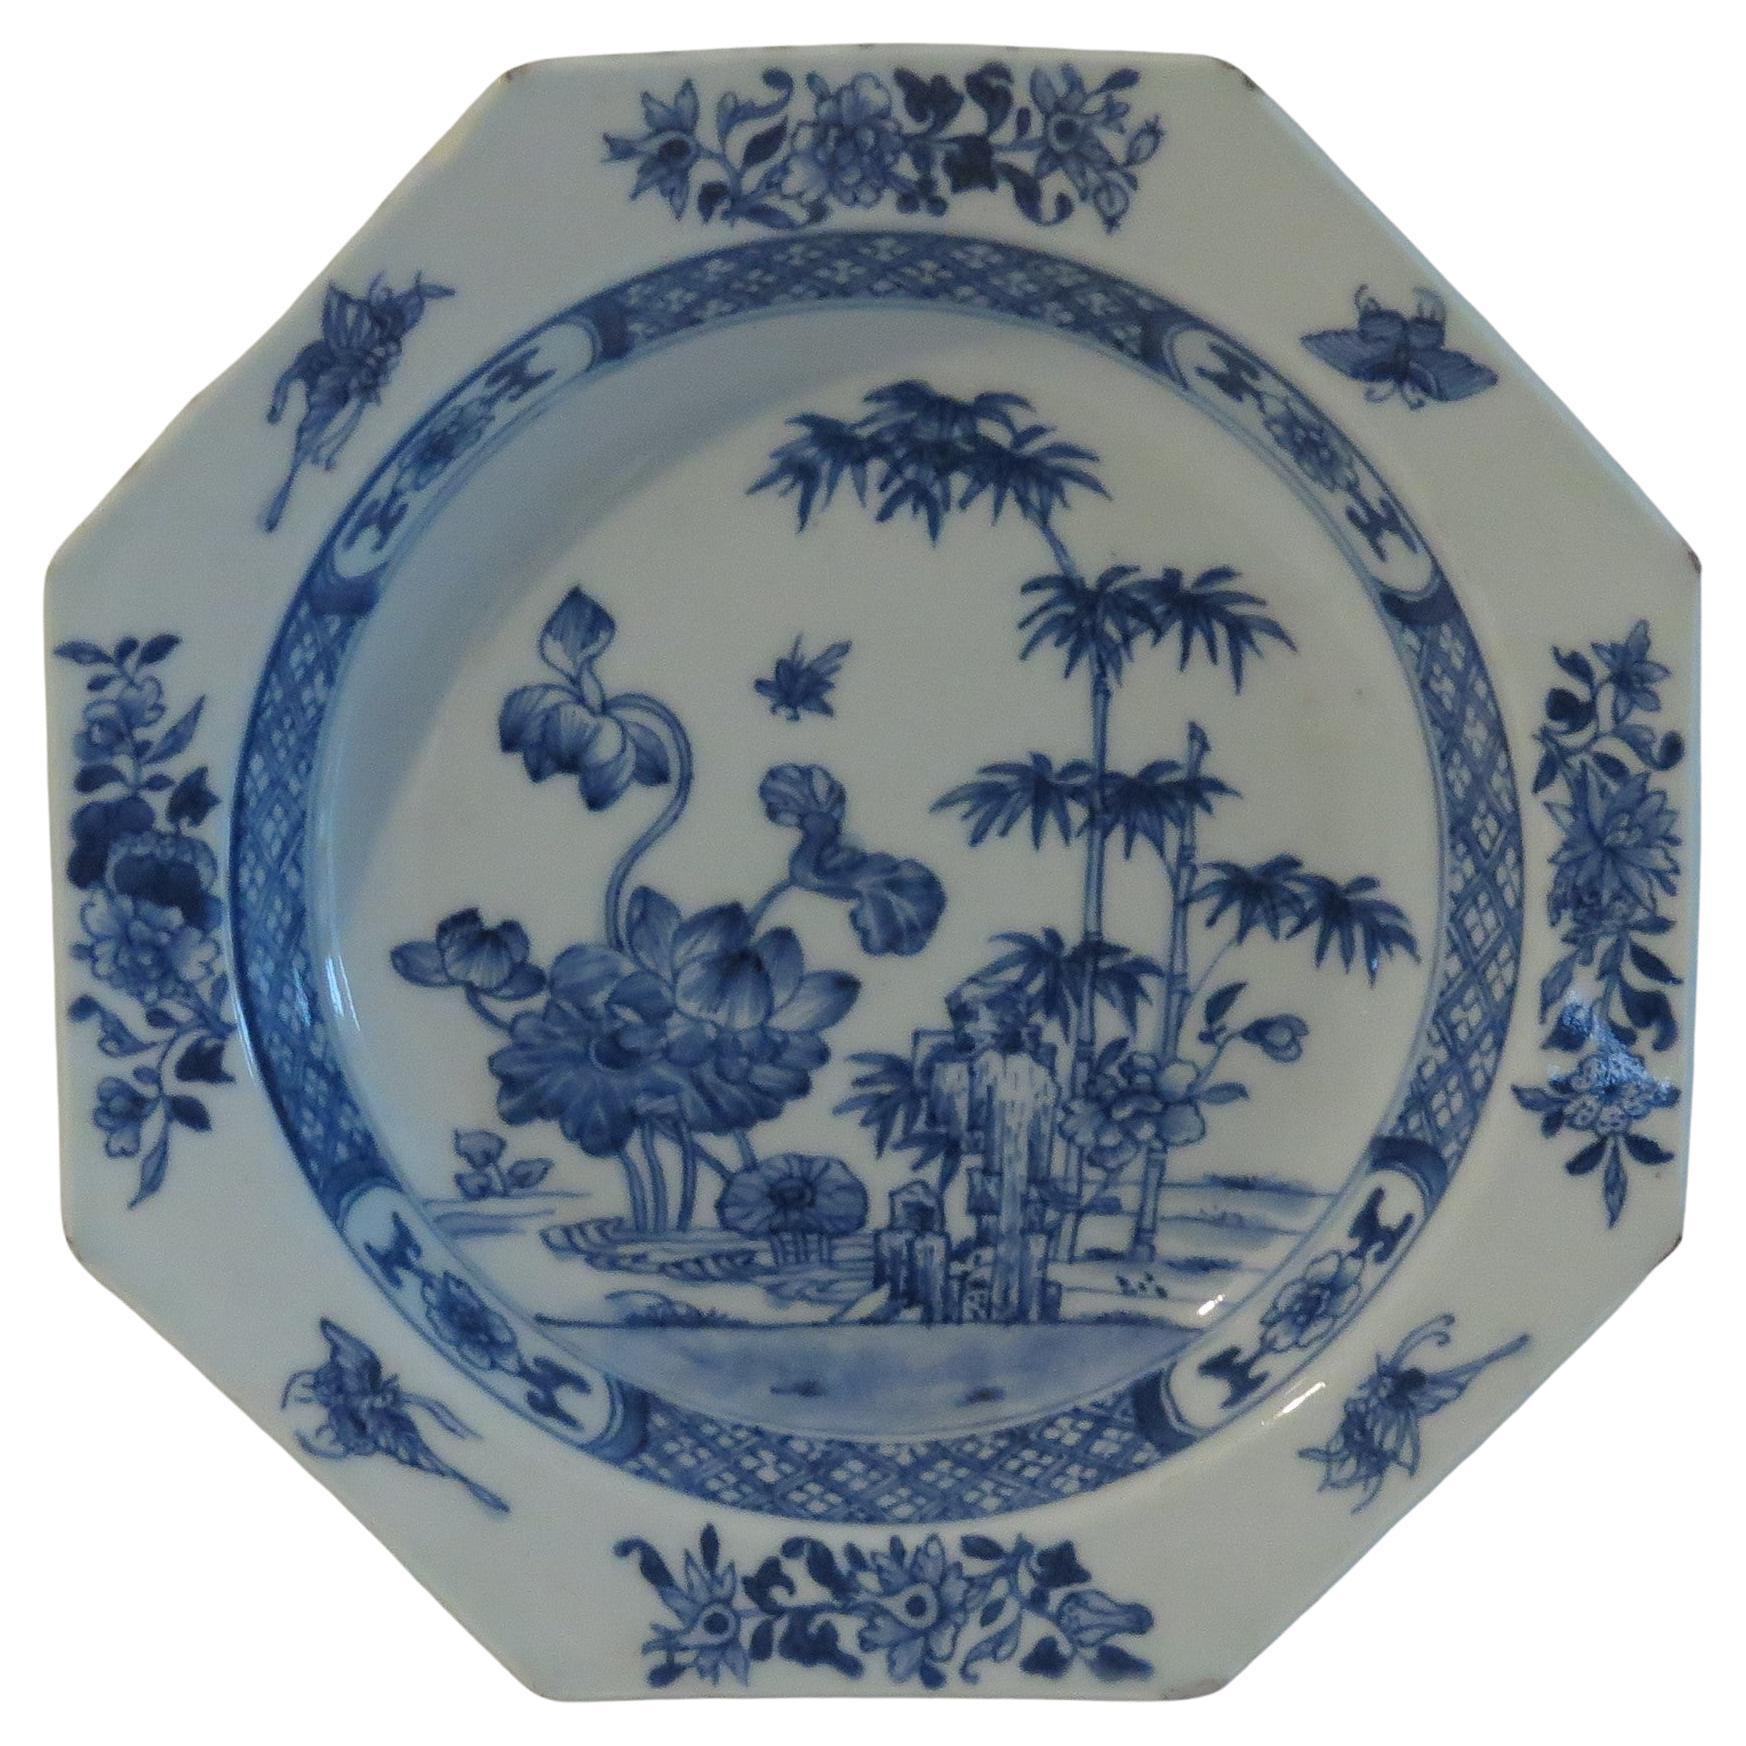 Chinese Export Soup or Deep Plate Canton Blue & White Porcelain, Qing circa 1770